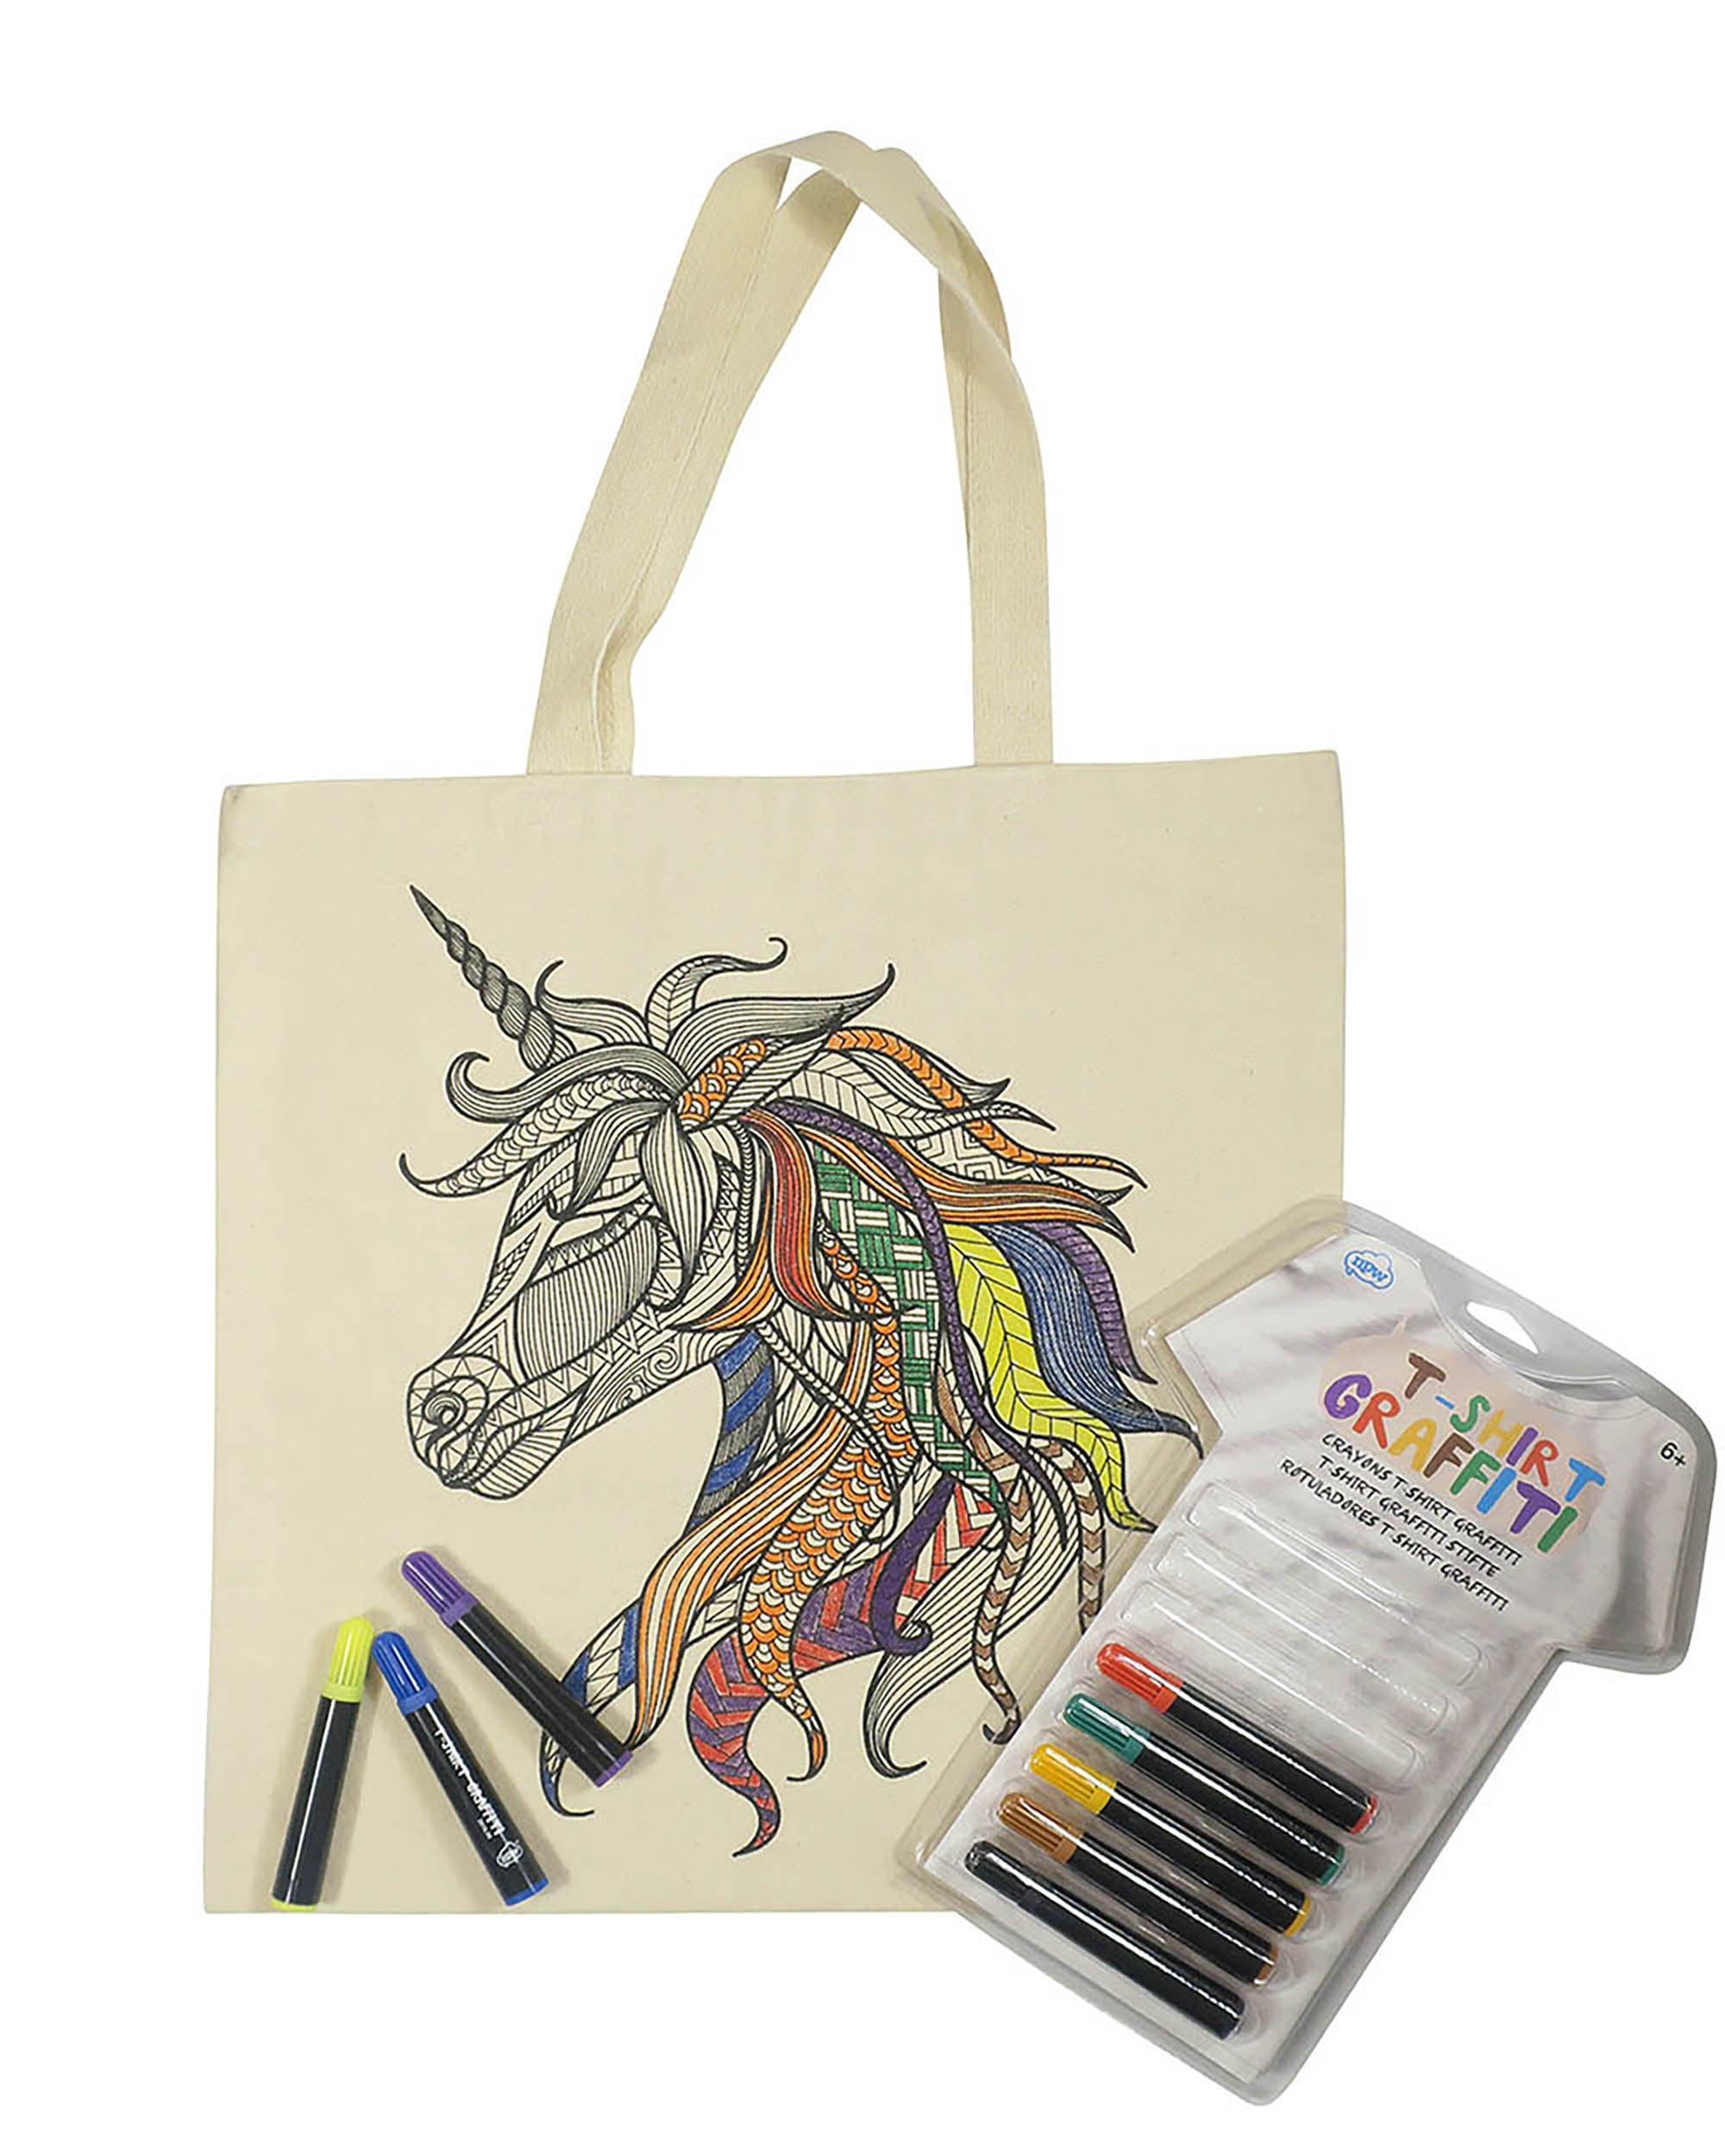 Coloring Tote Bag Kit - Adorned By You